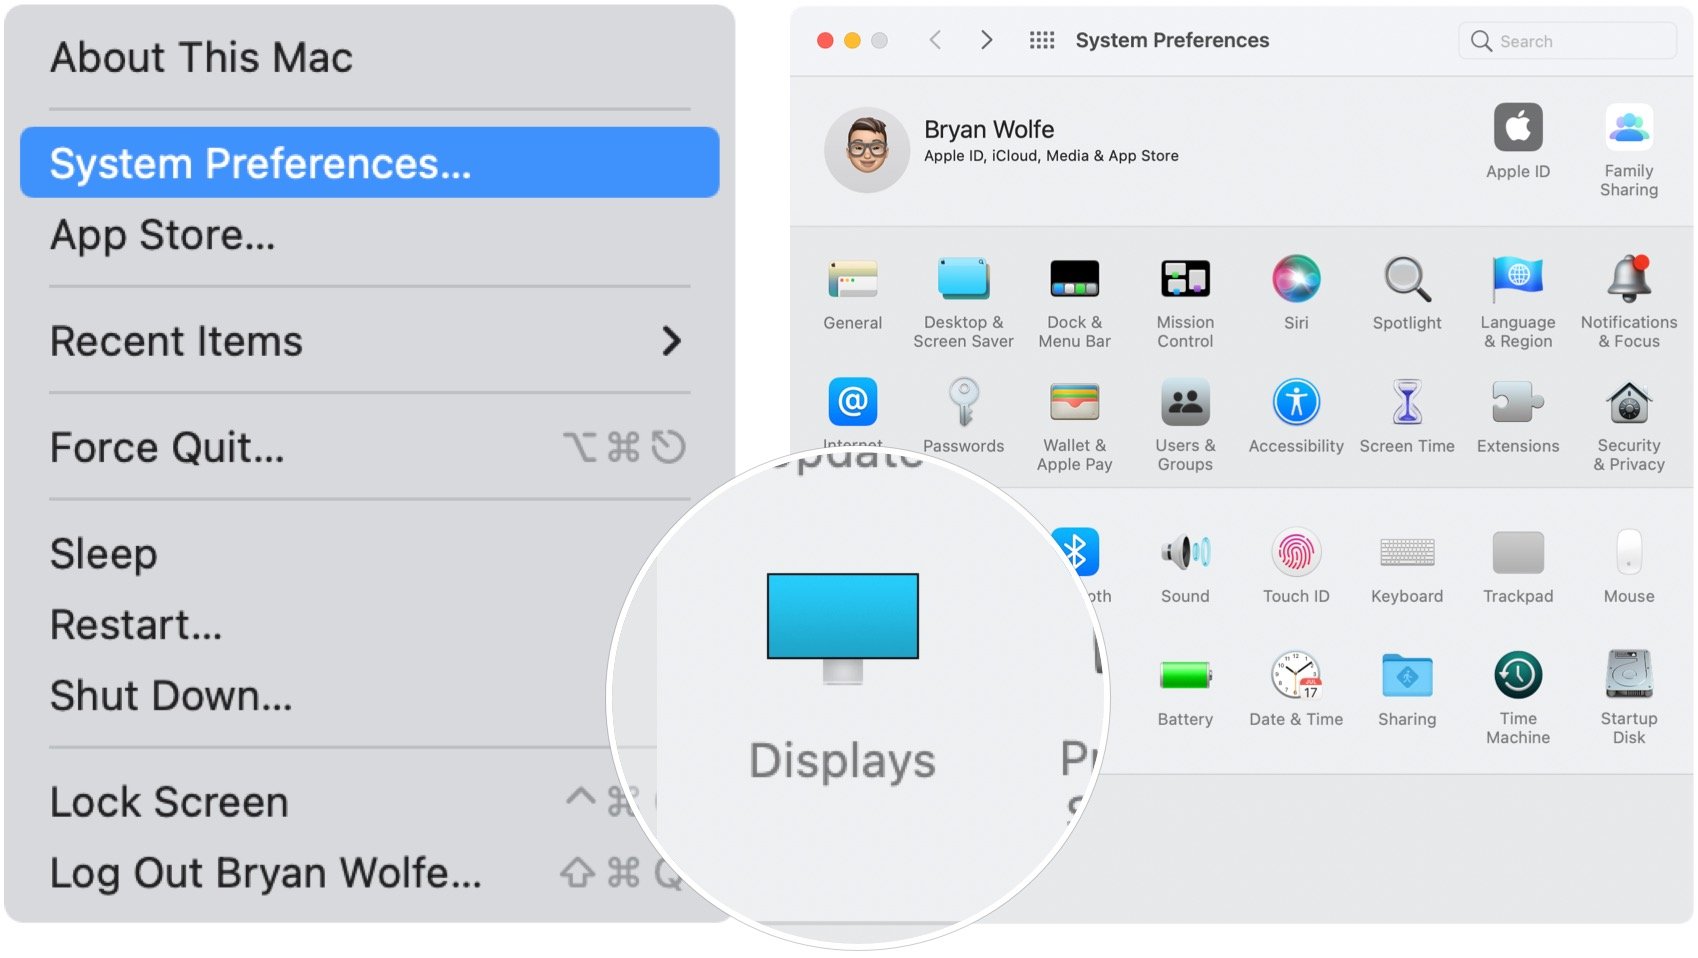 To change the refresh rate on your Mac, click on the Apple icon at the top left on the menu bar. Select System Preferences, then Displays.